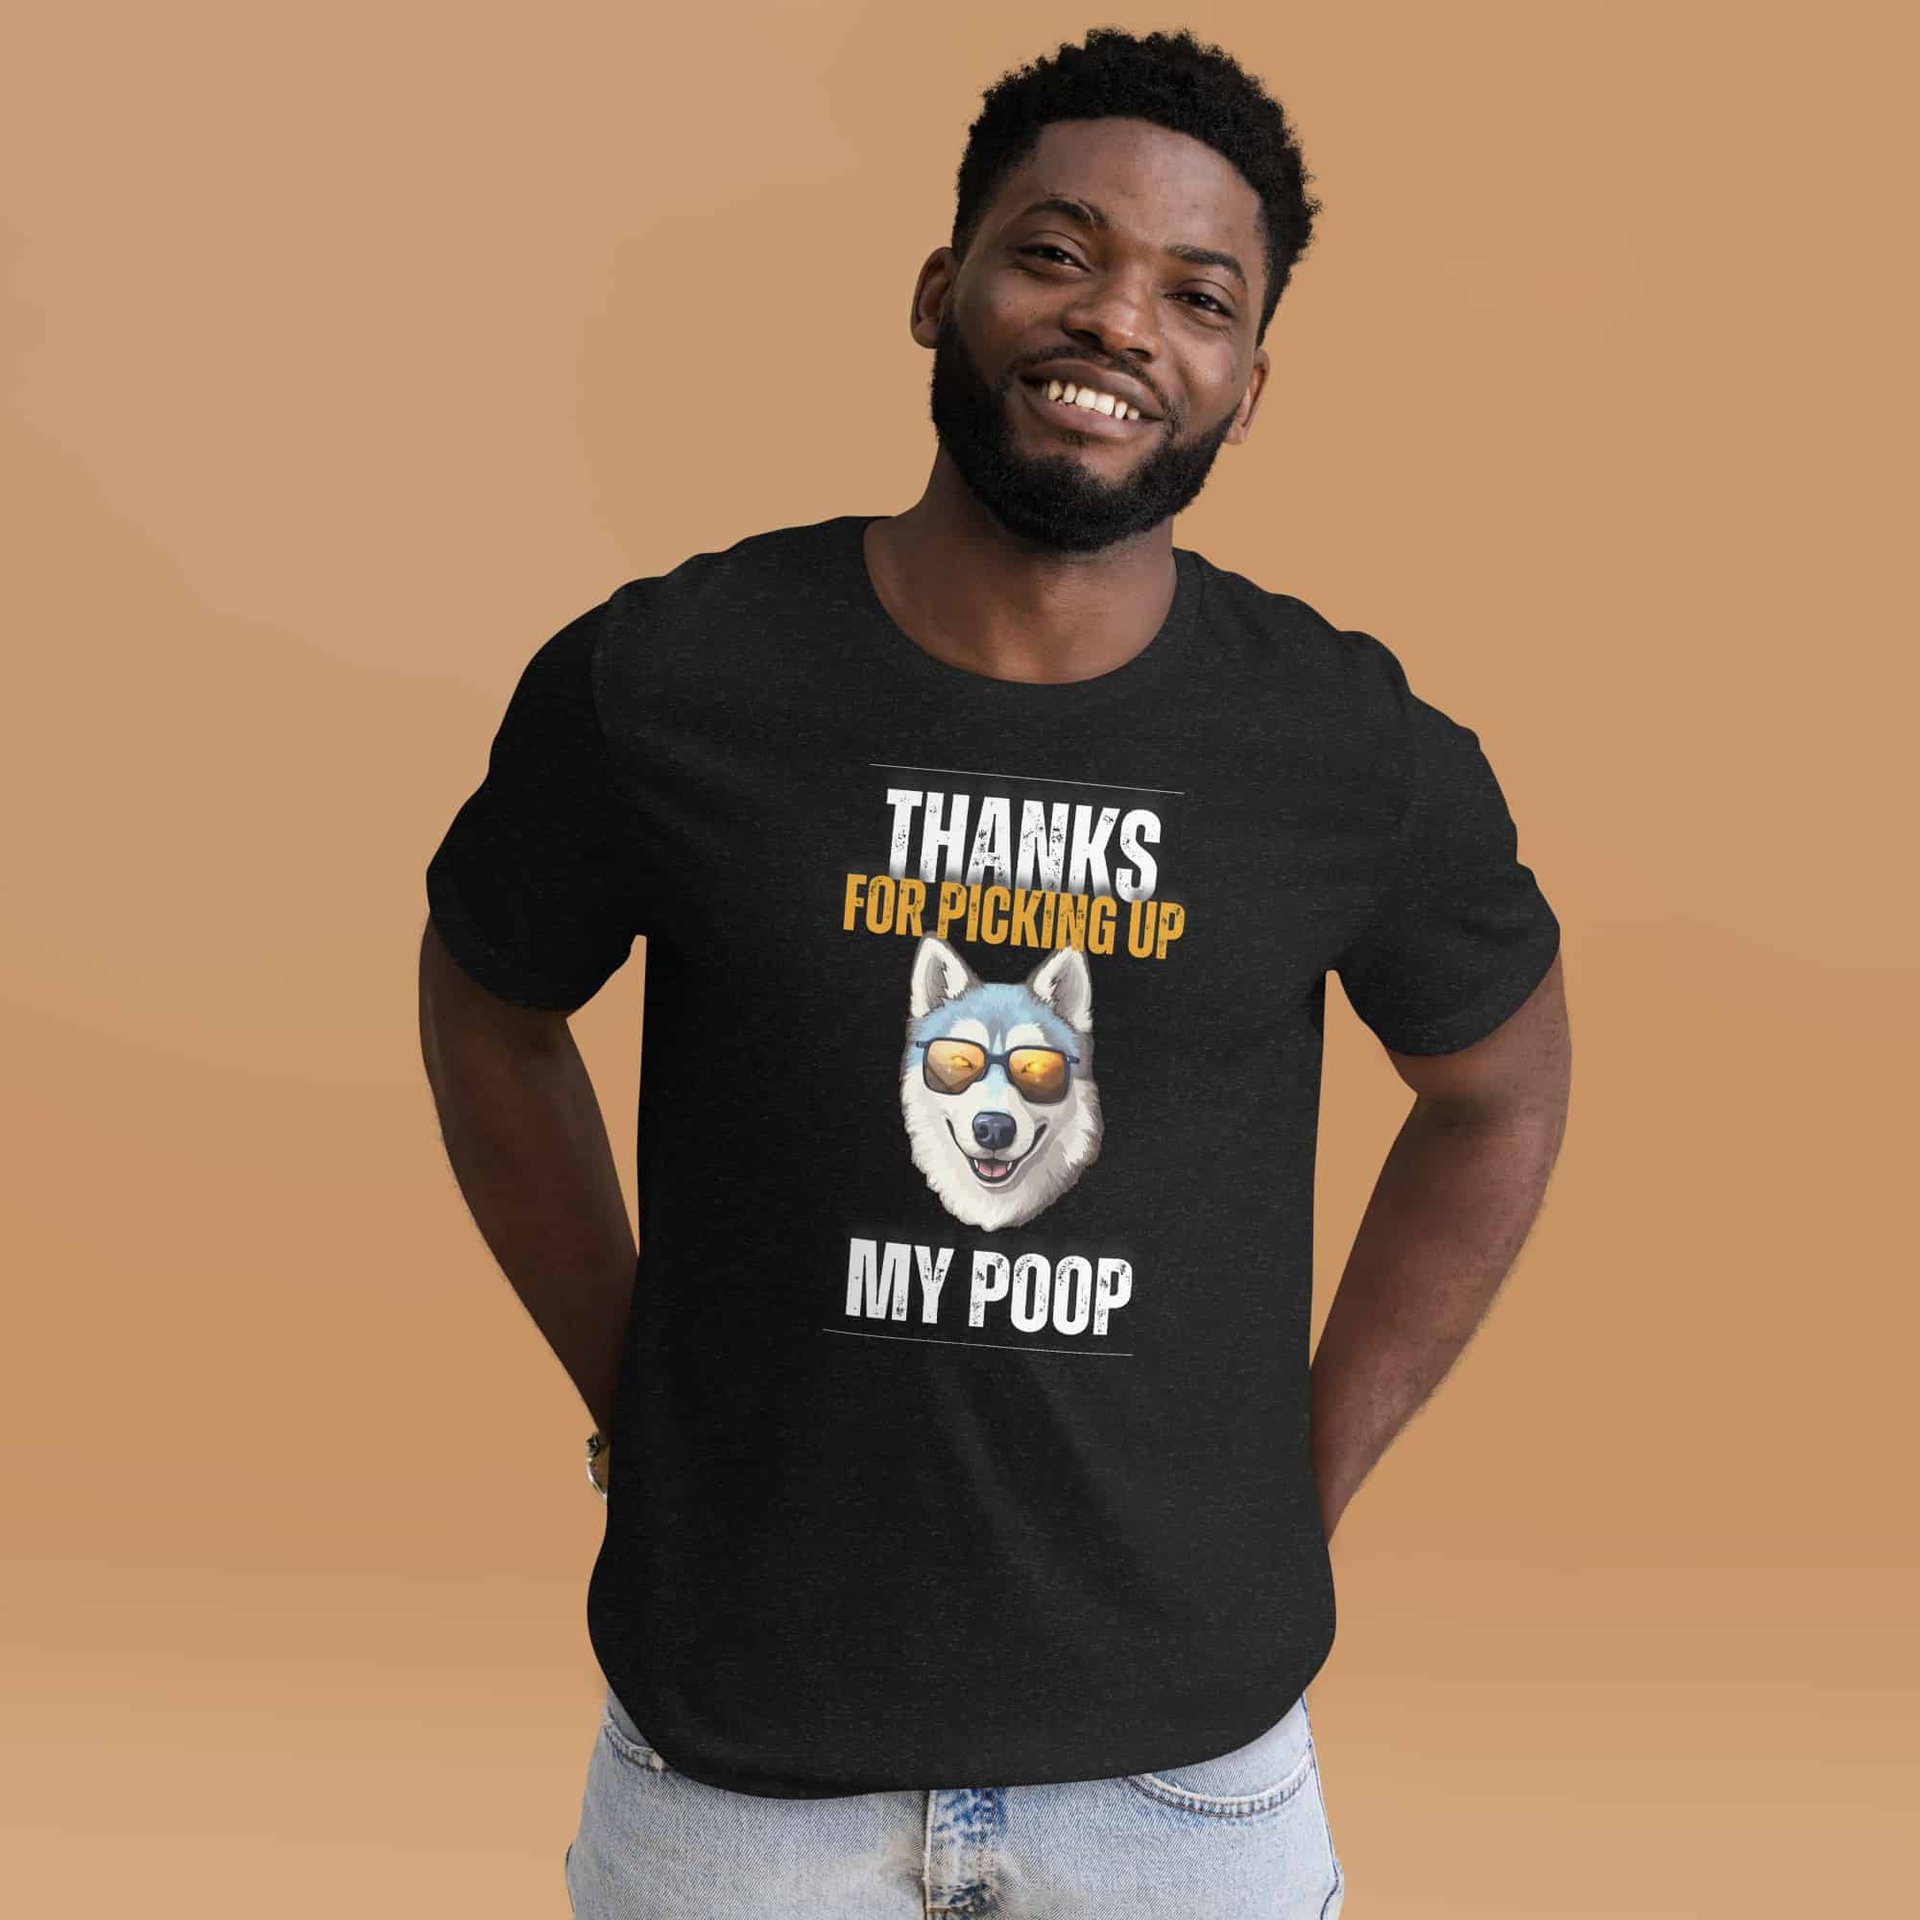 Thanks For Picking Up My POOP Funny Huskies Unisex T-Shirt. Black Heather. Male